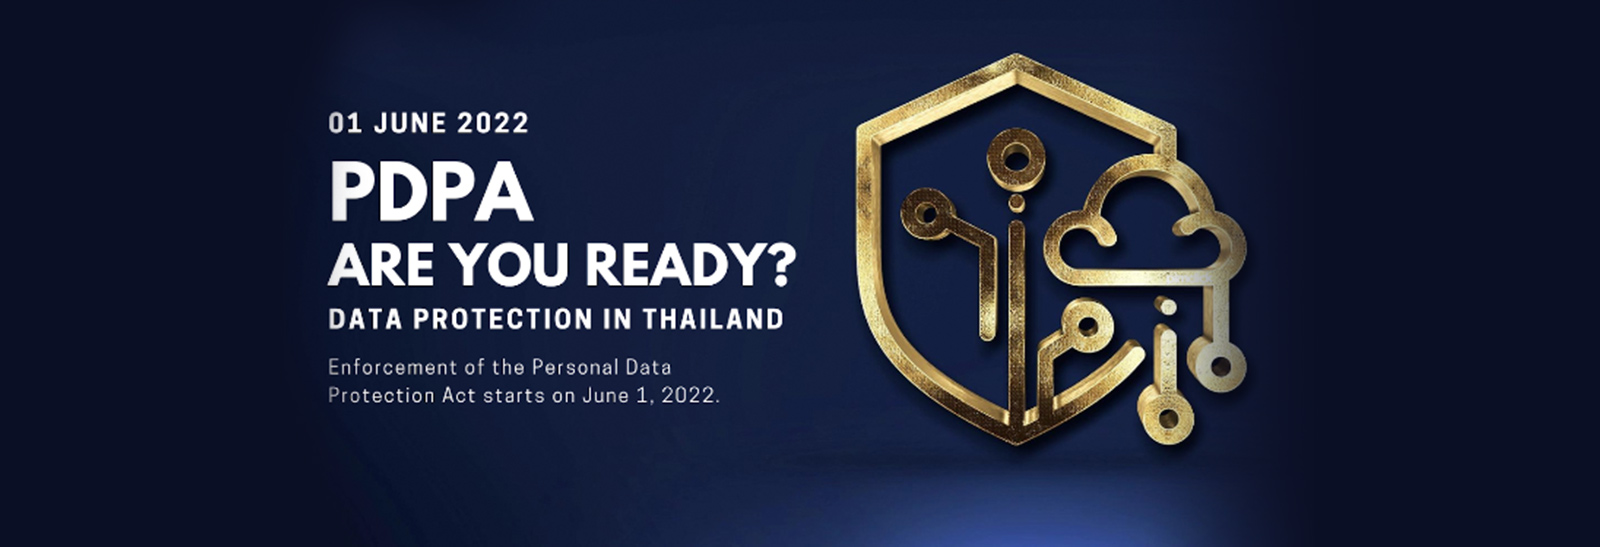 Data Protection & PDPA in Thailand